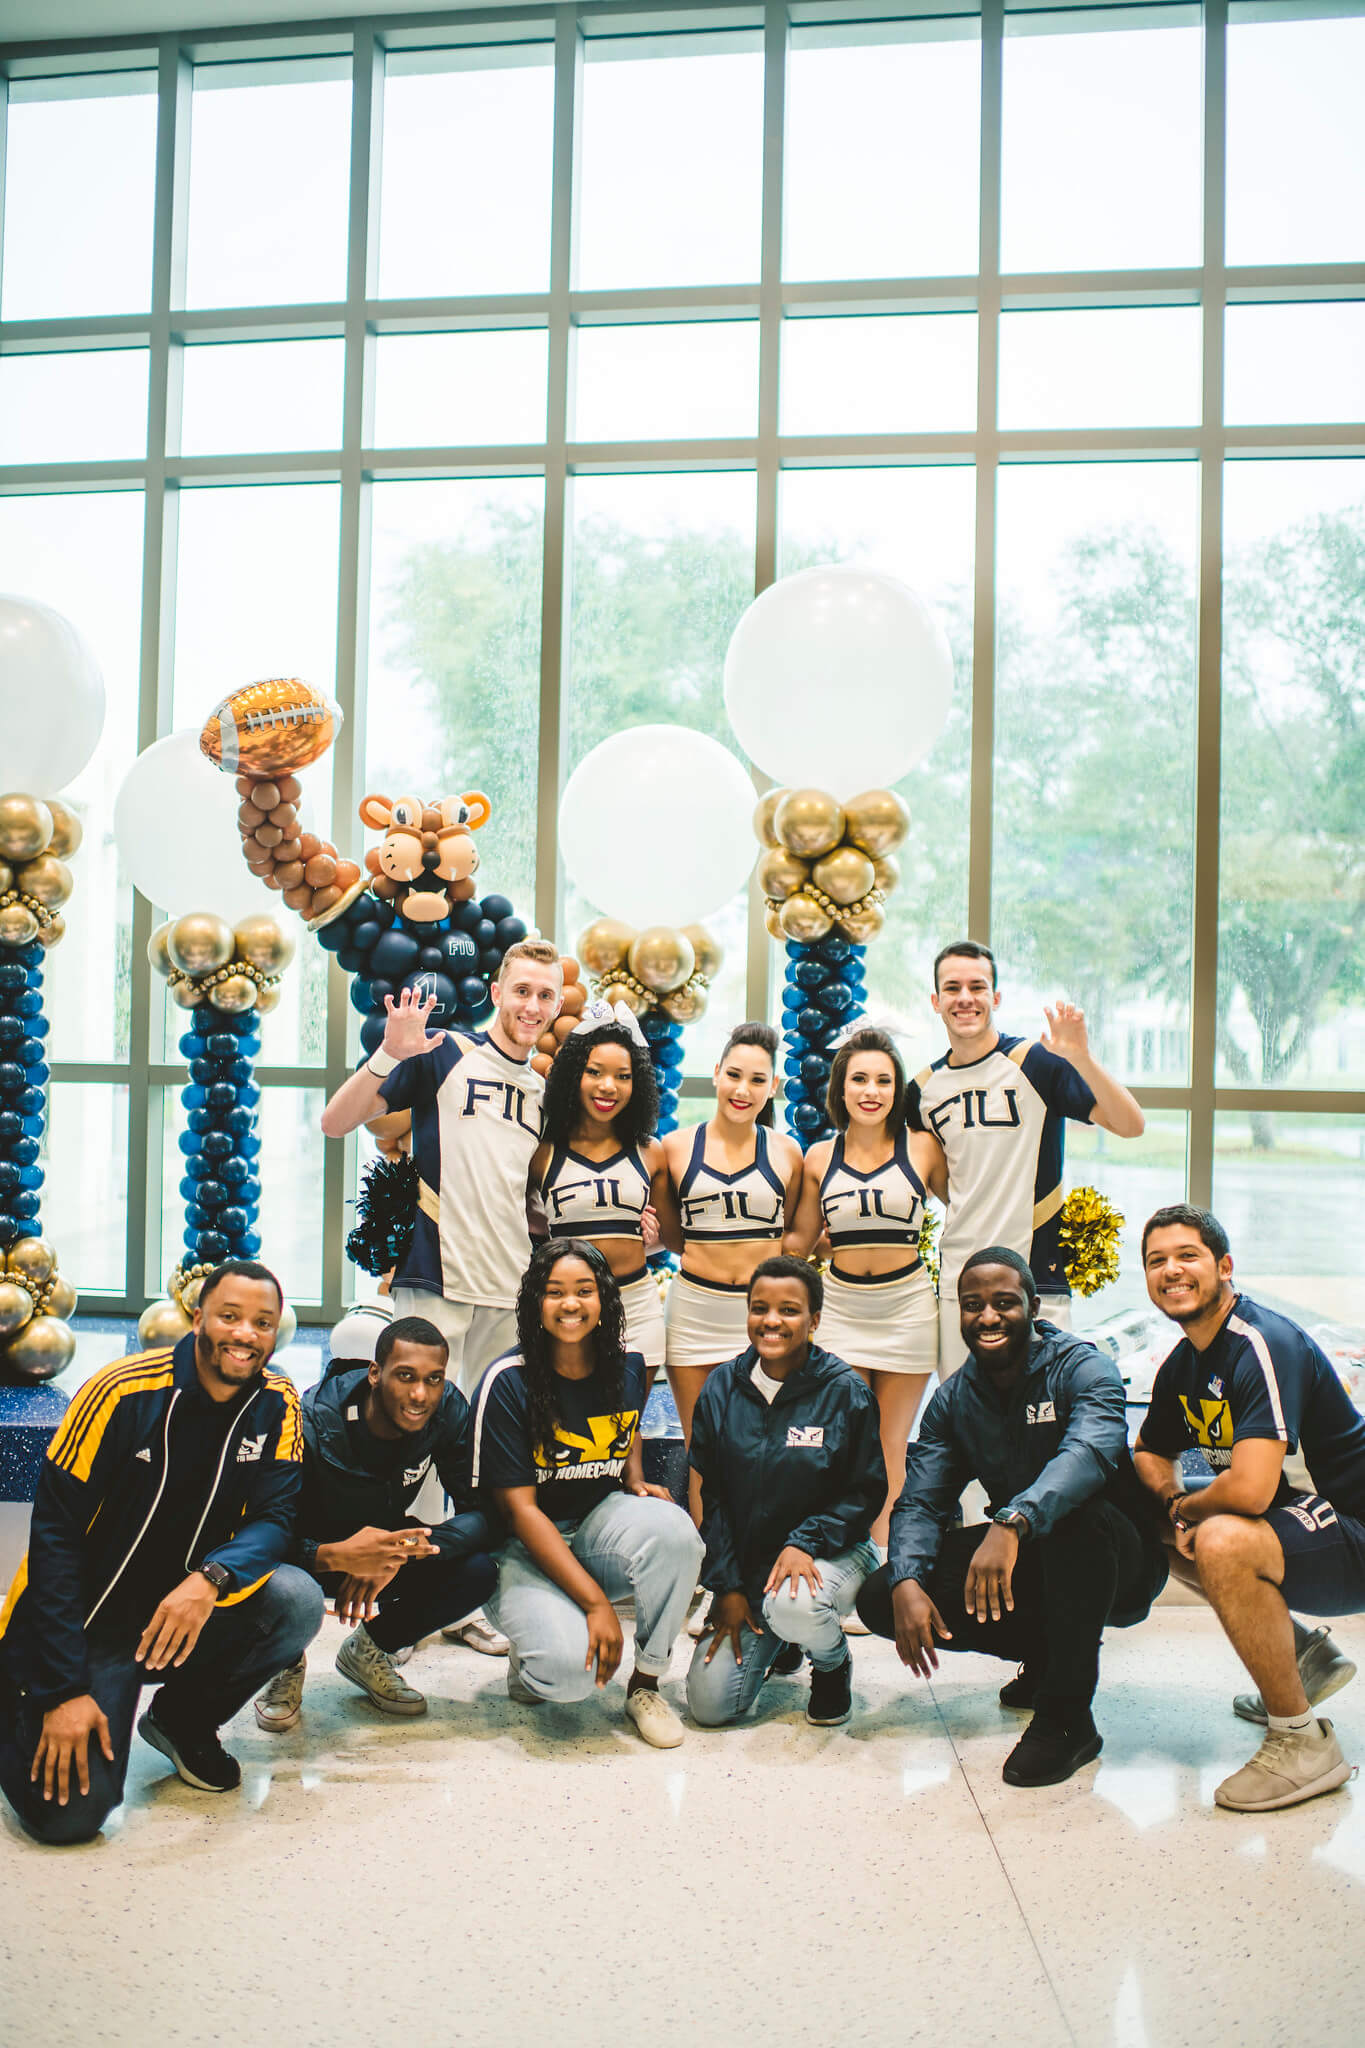 Biscayne Bay Campus students with the FIU Dazzlers